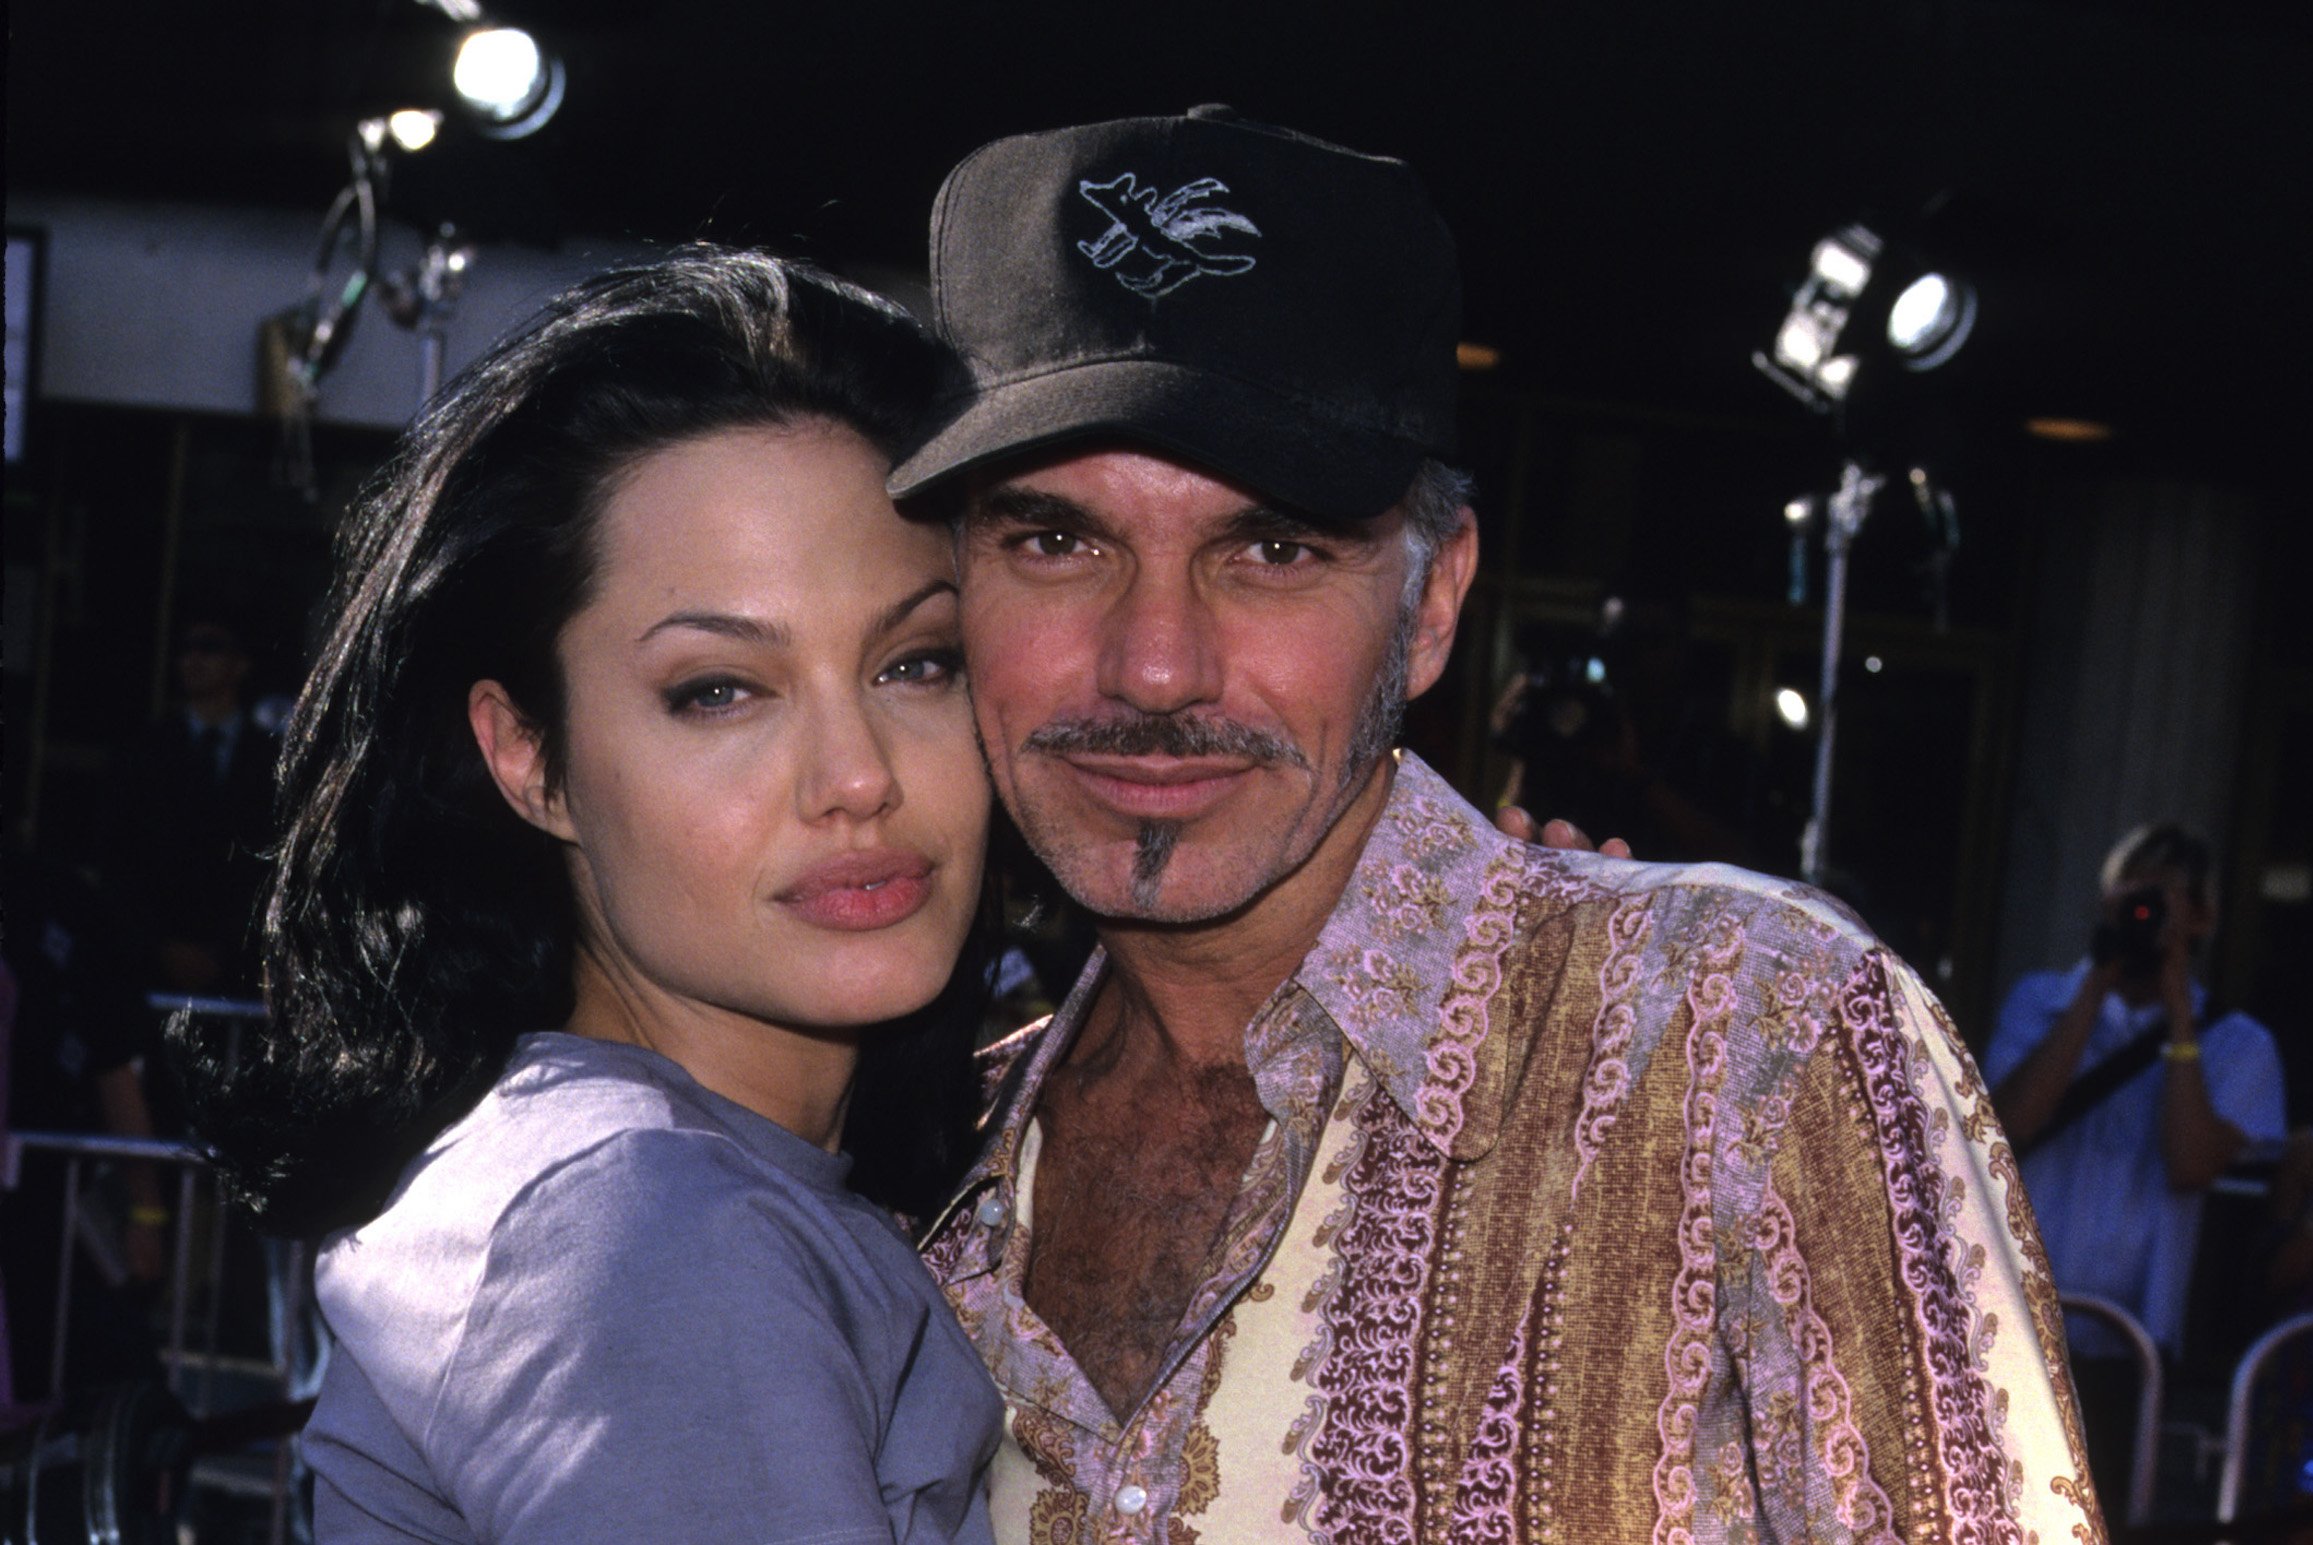 Angelina Sex - Angelina Jolie and Billy Bob Thornton Had Sex in the Car On the Way to the  'Gone In 60 Seconds' Premiere